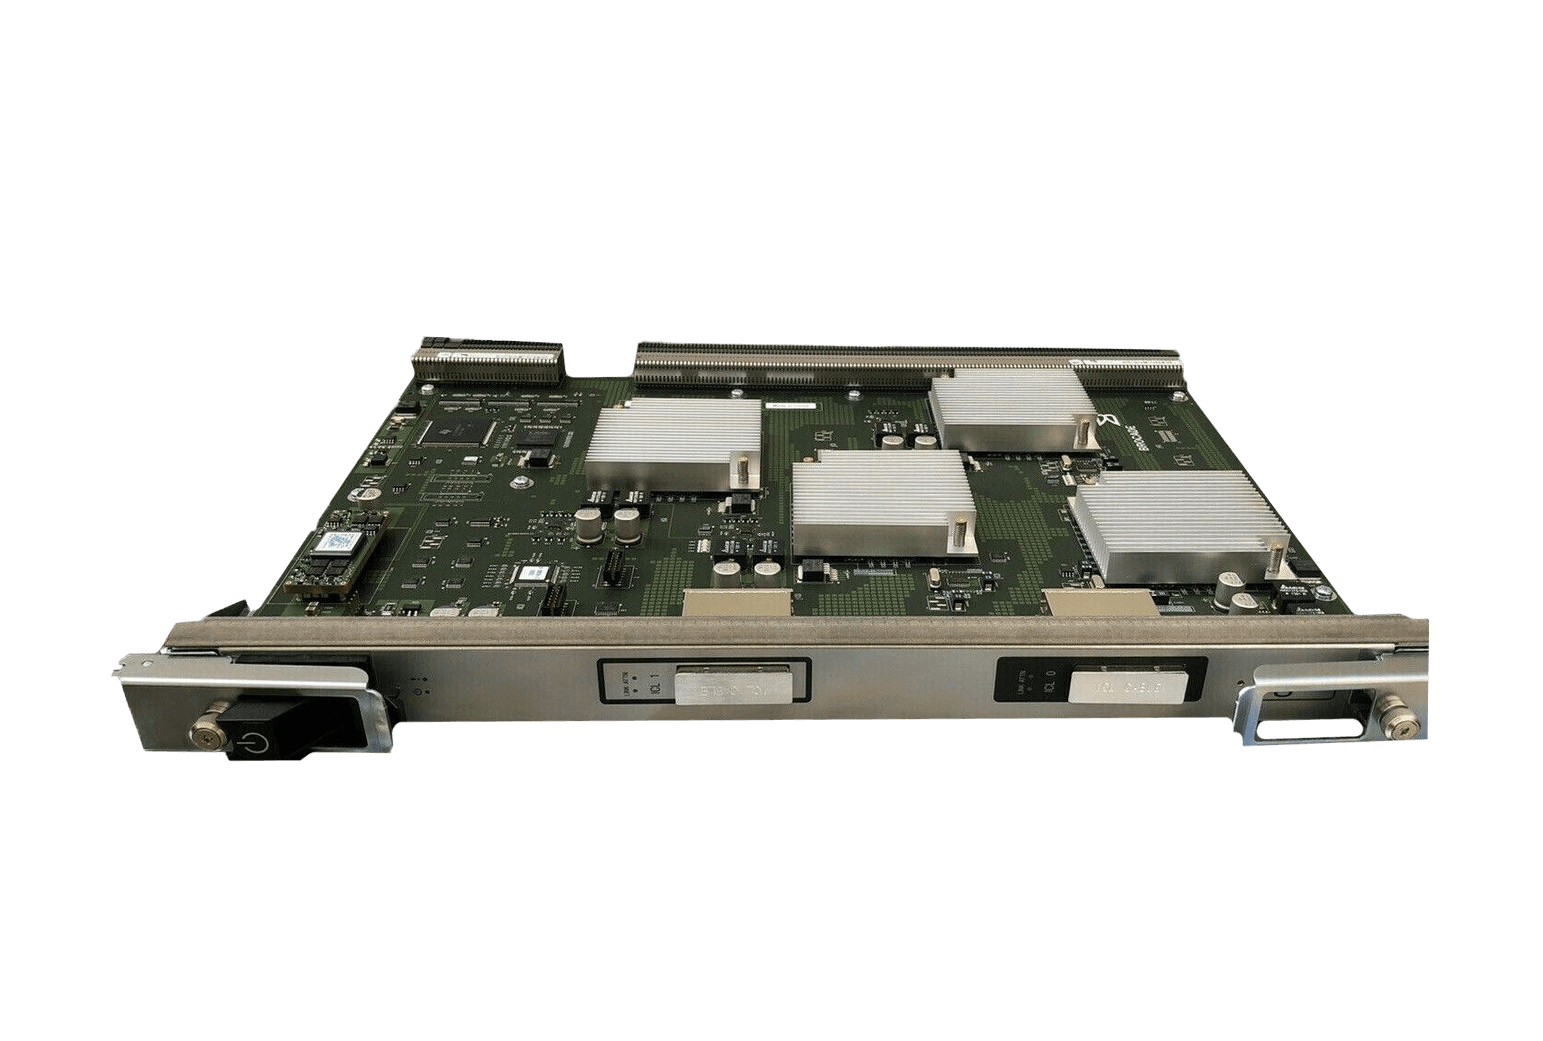 HP 481551-002 StorageWorks StoreFabric DC SAN Director 60-1000377-12 CR8 Core Switch Blade Board ICL.